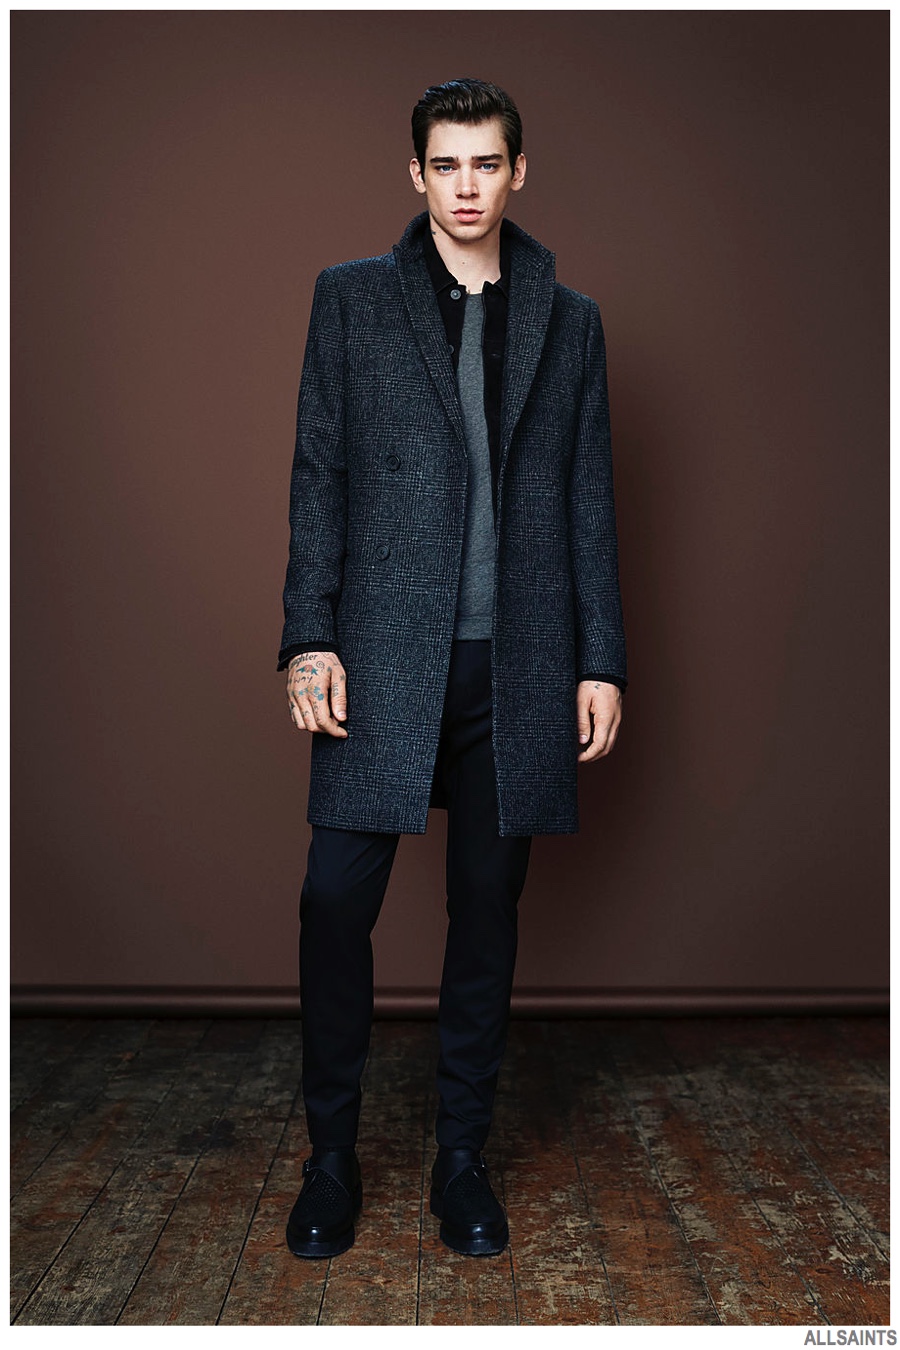 Cole Mohr Rocks AllSaints' Holiday Styles – The Fashionisto